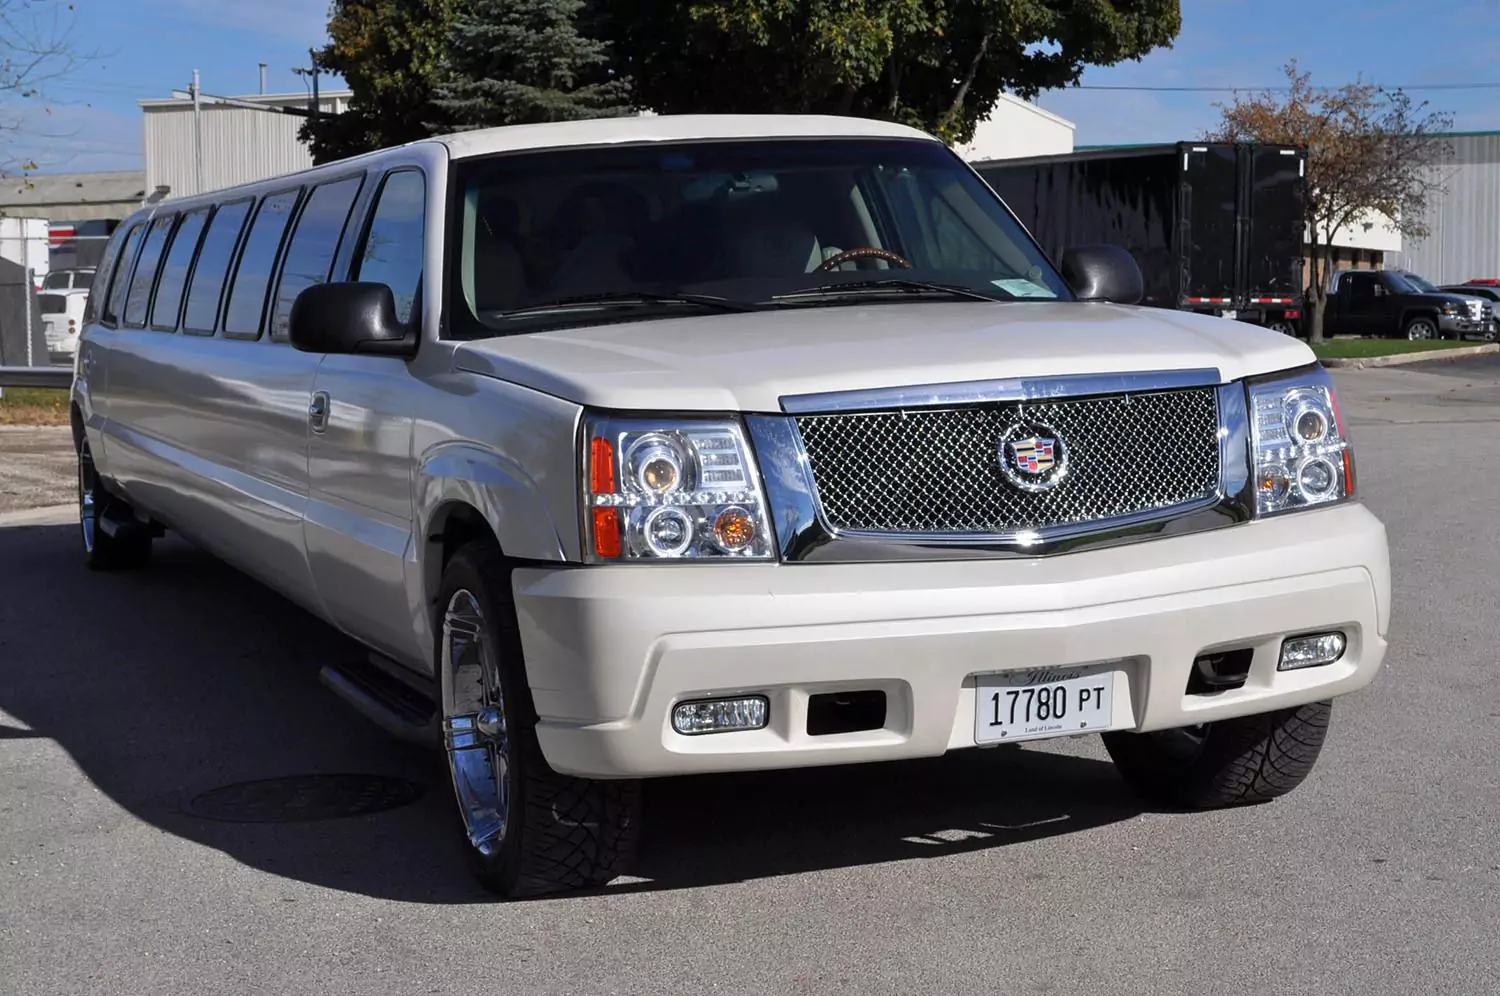 Hummer Limo Exterior